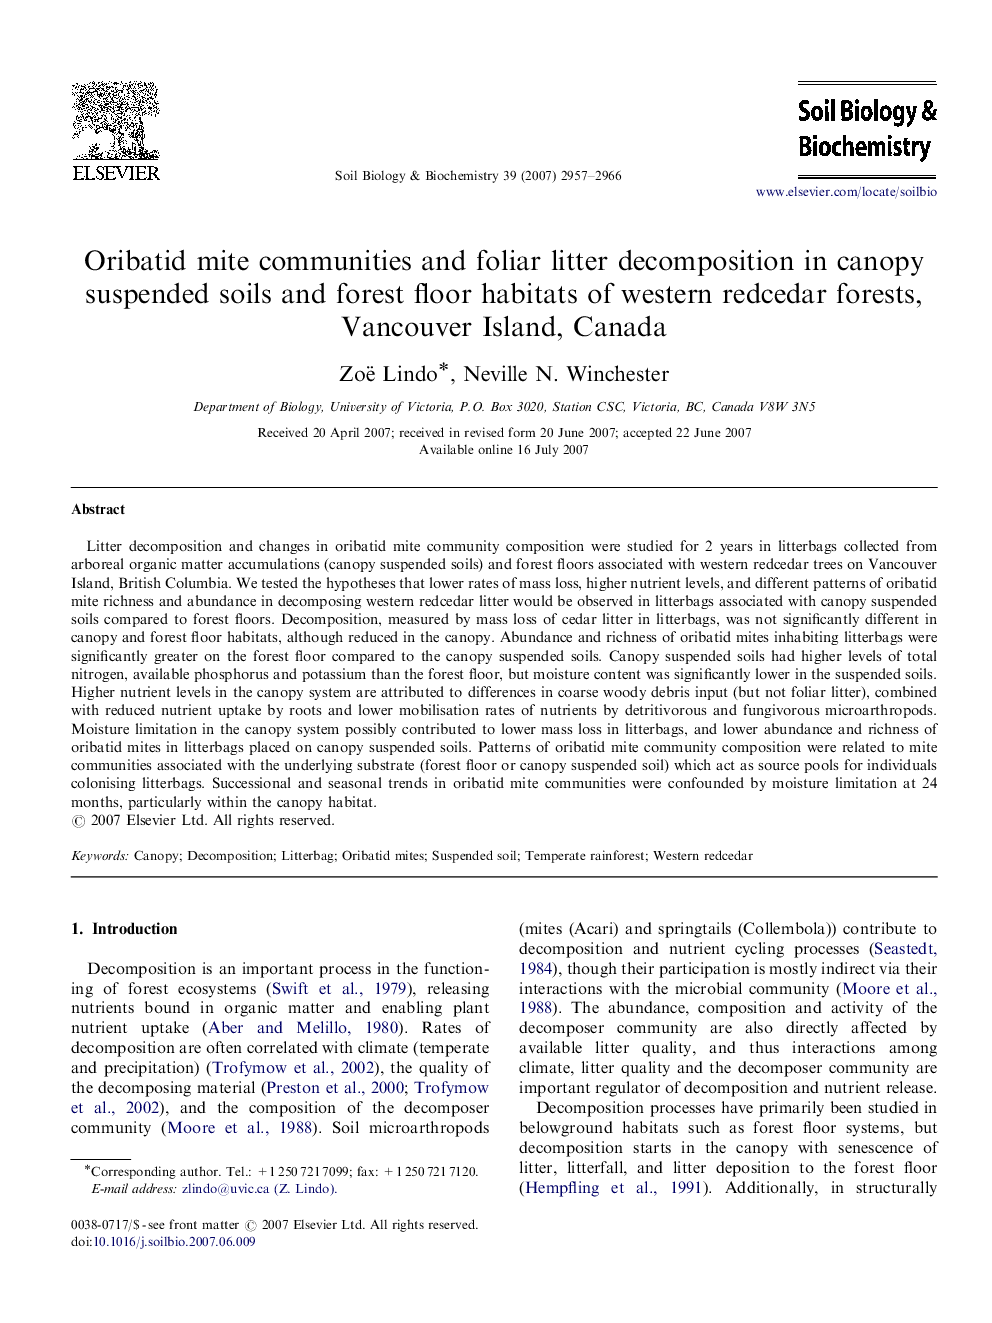 Oribatid mite communities and foliar litter decomposition in canopy suspended soils and forest floor habitats of western redcedar forests, Vancouver Island, Canada